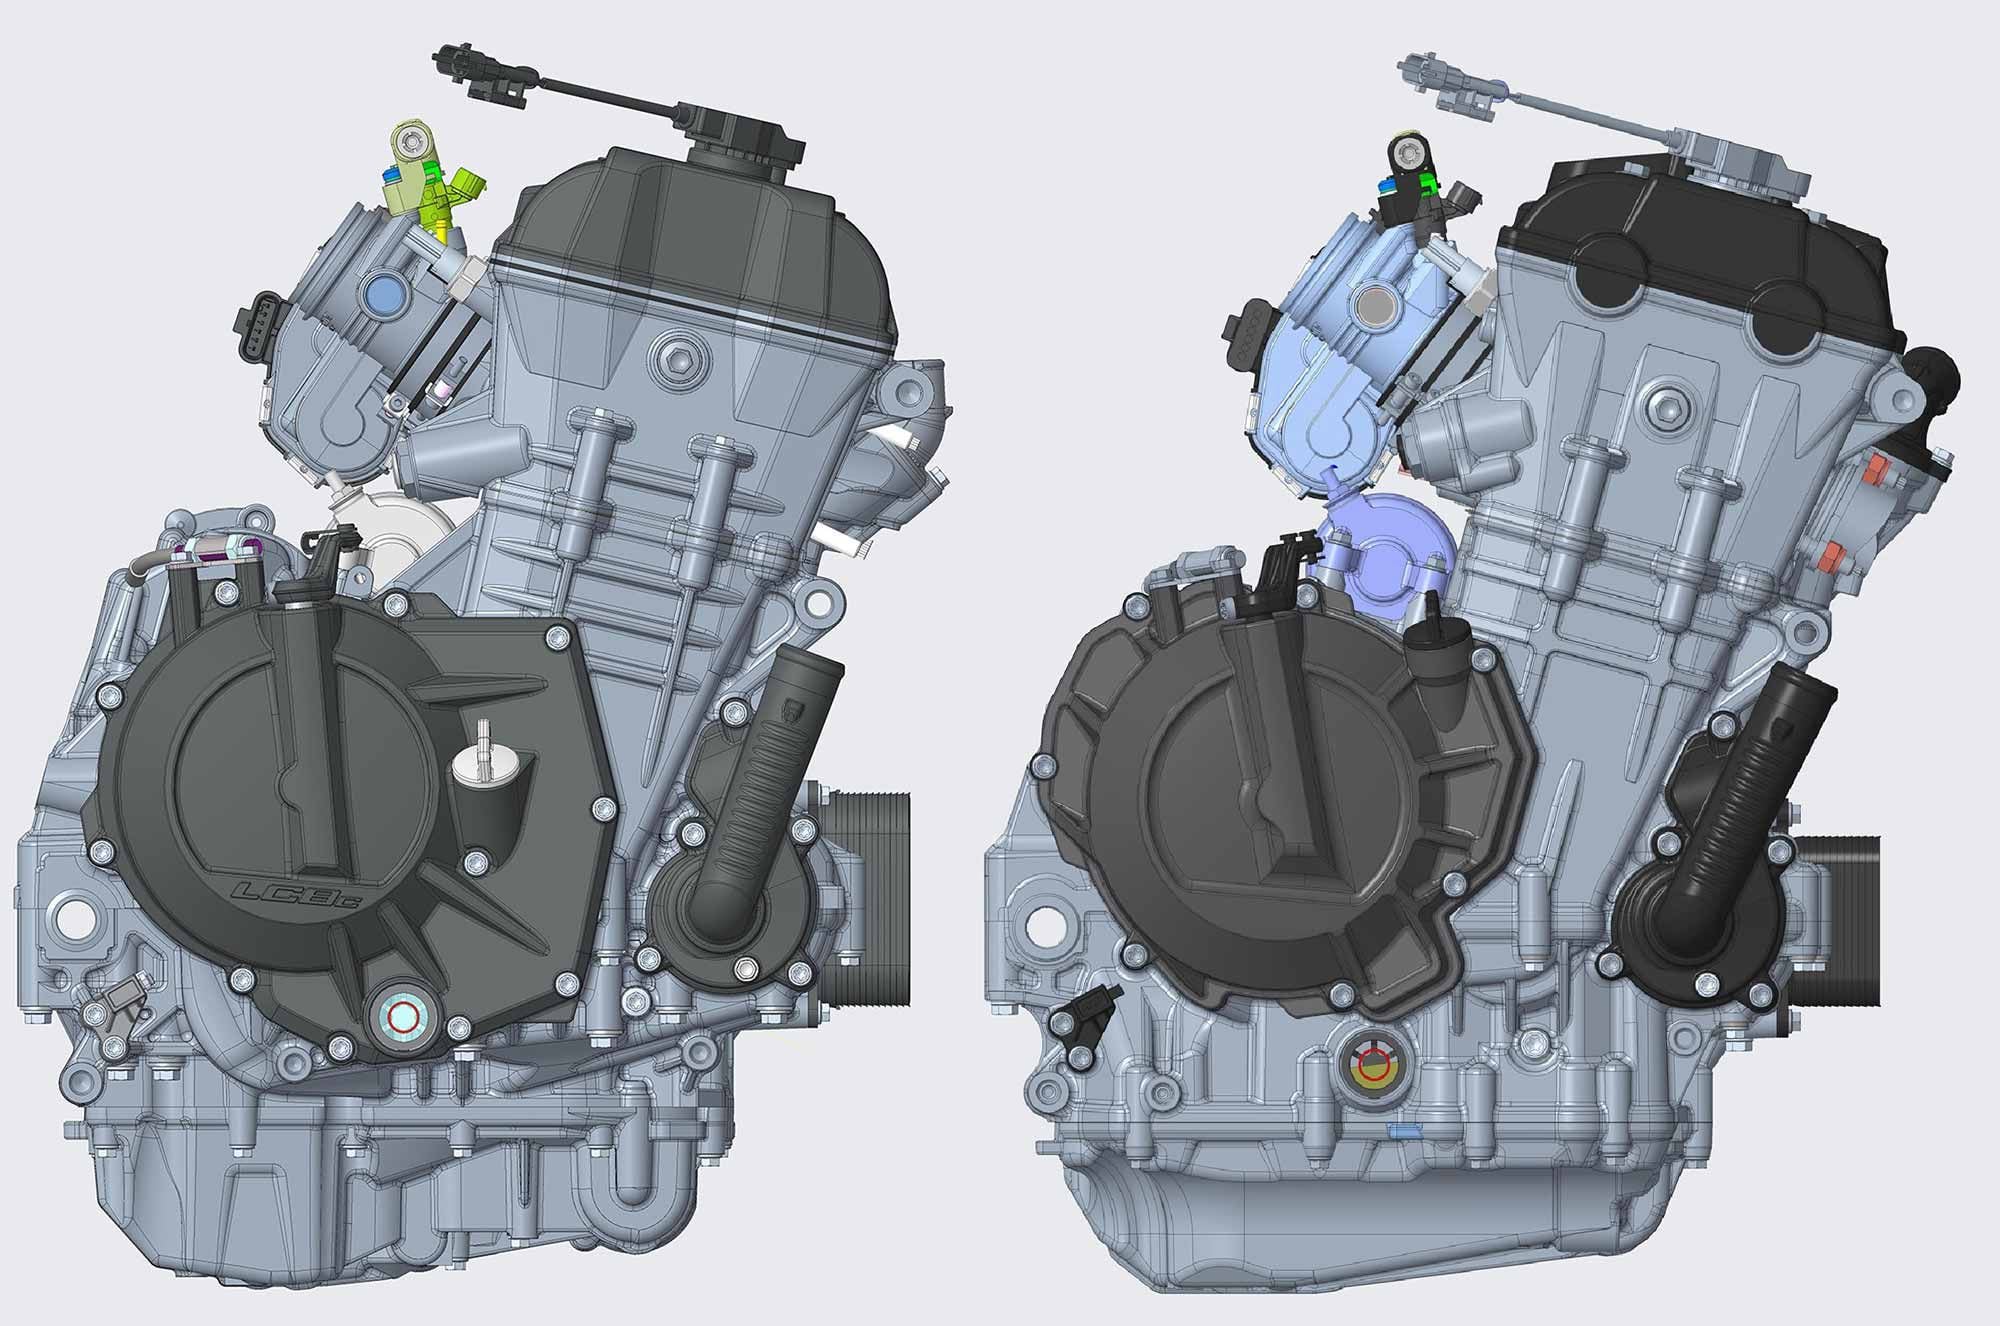 Images showing the new engine (left) and equivalent images of the existing LC8c (right) allow easy comparison.